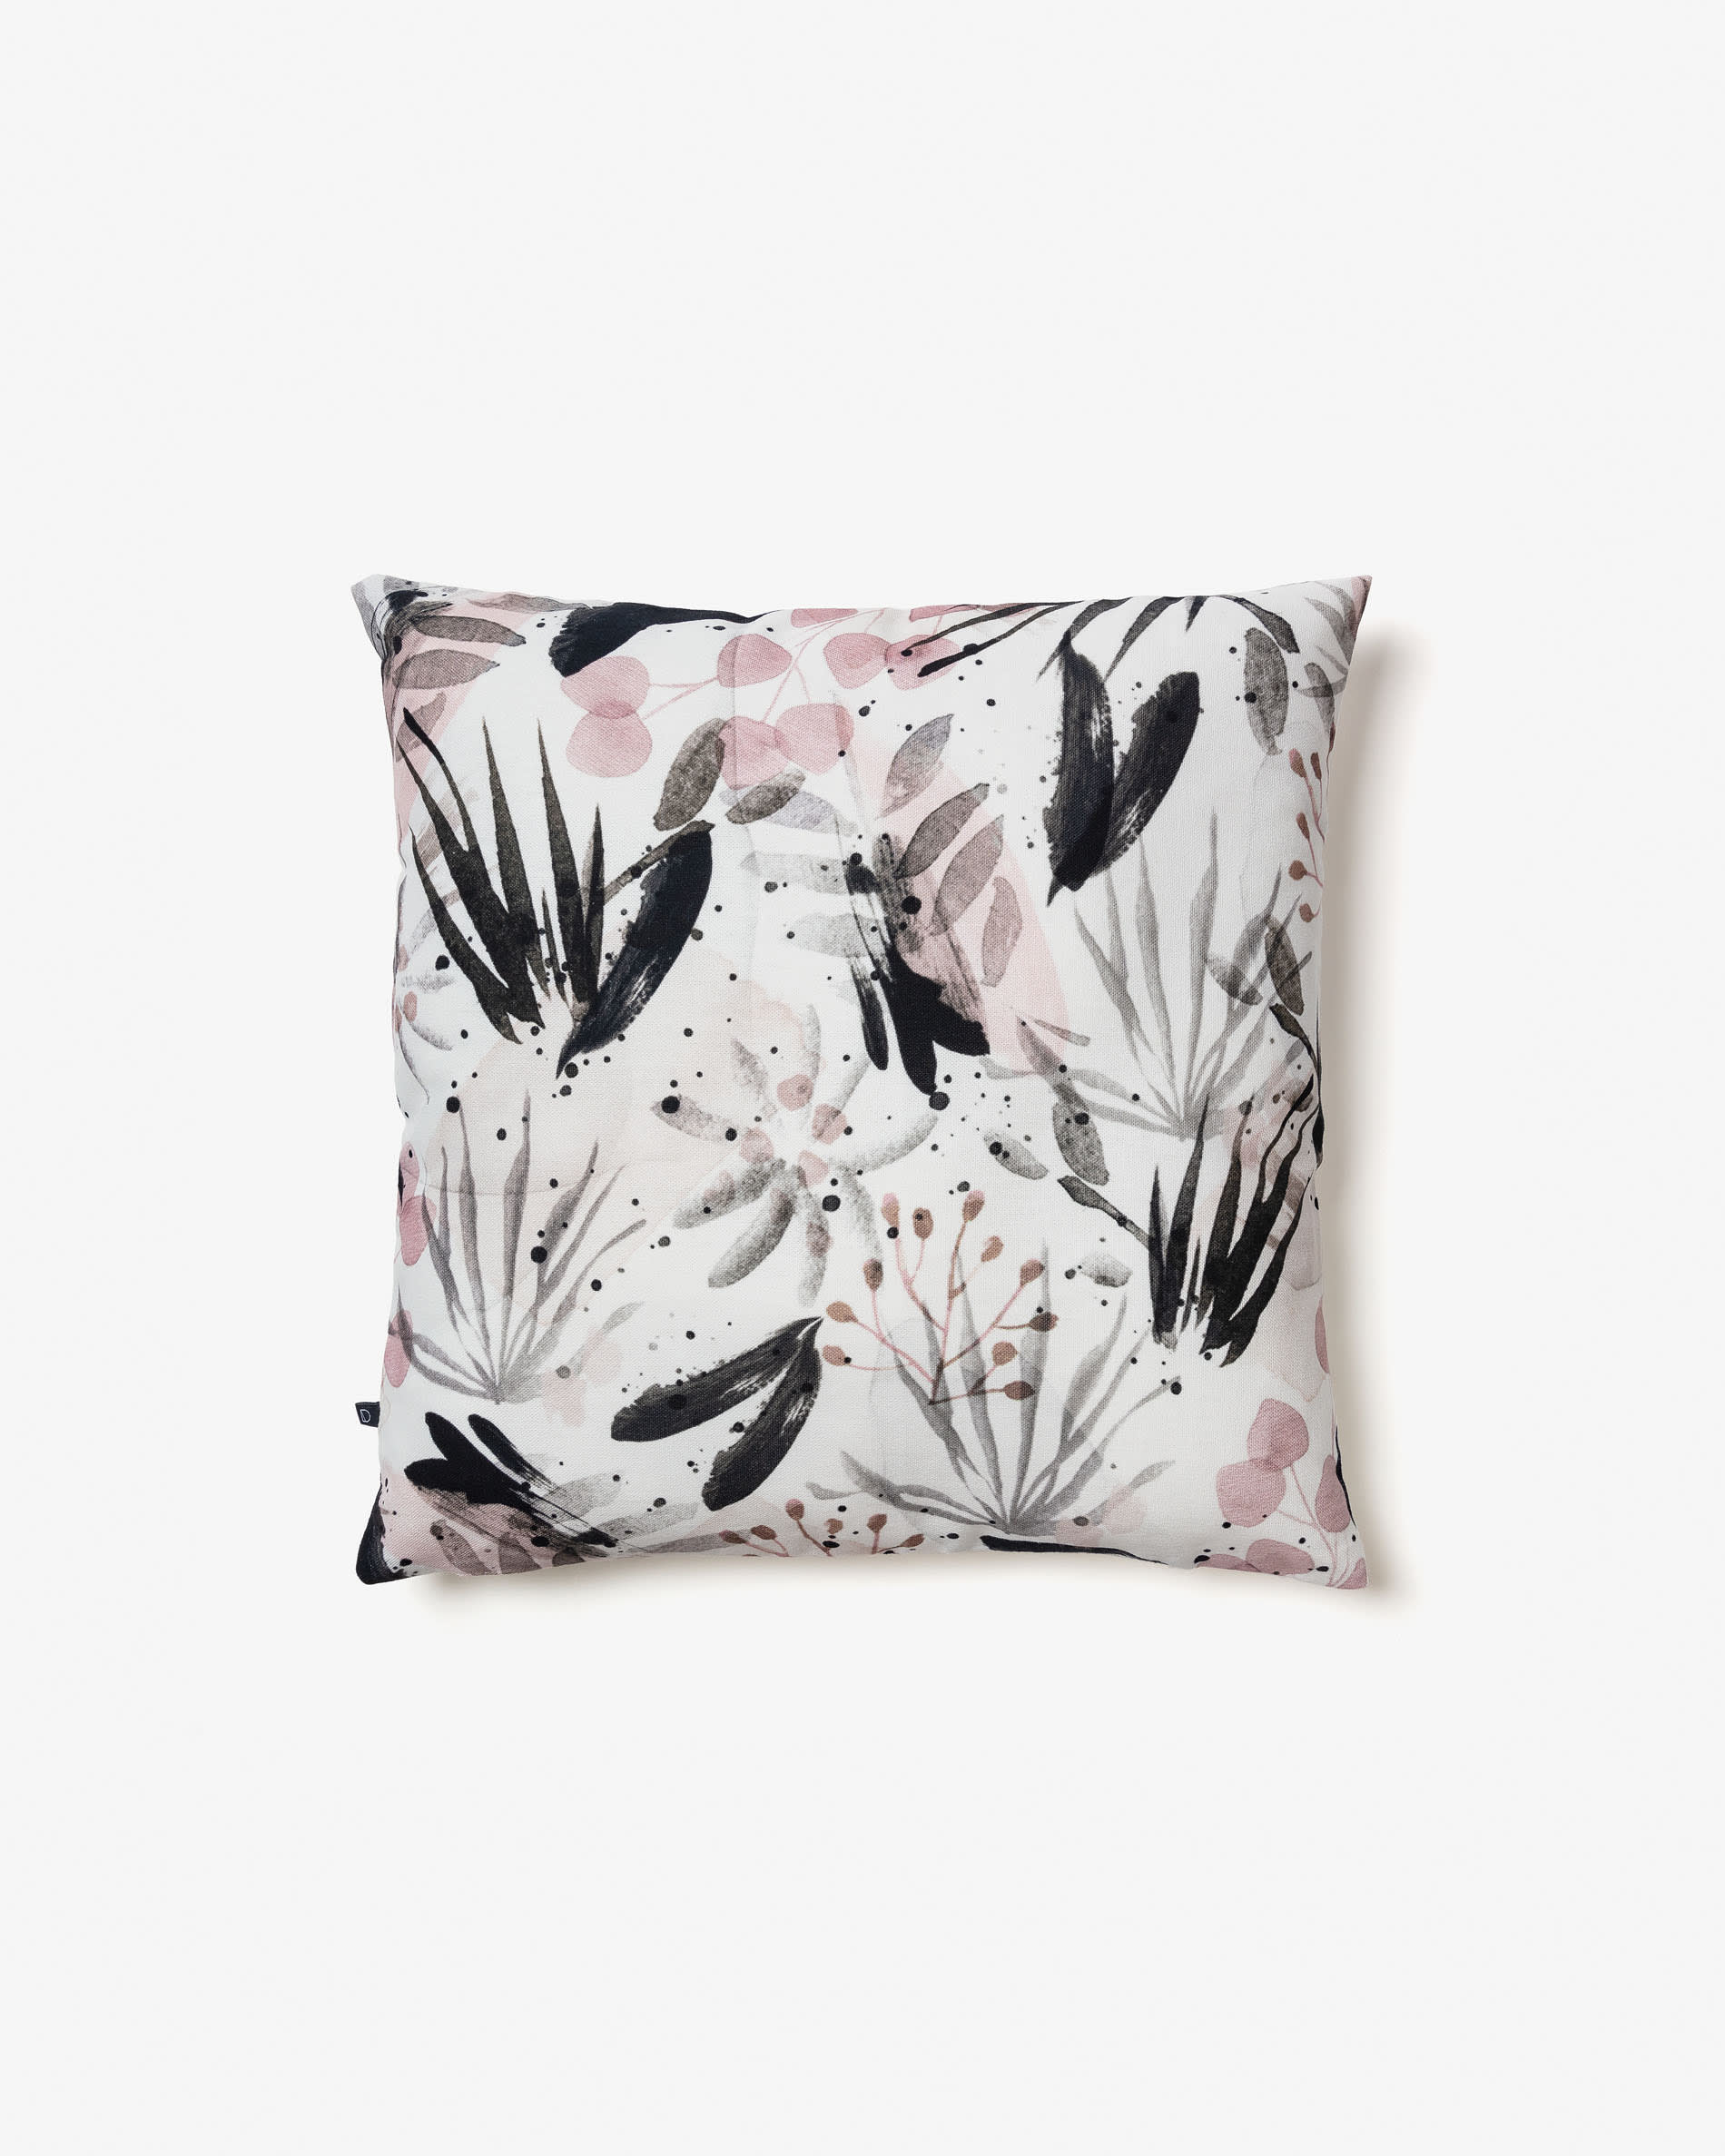 Cushion cover Kourtney 45 x 45 cm white, black and pink